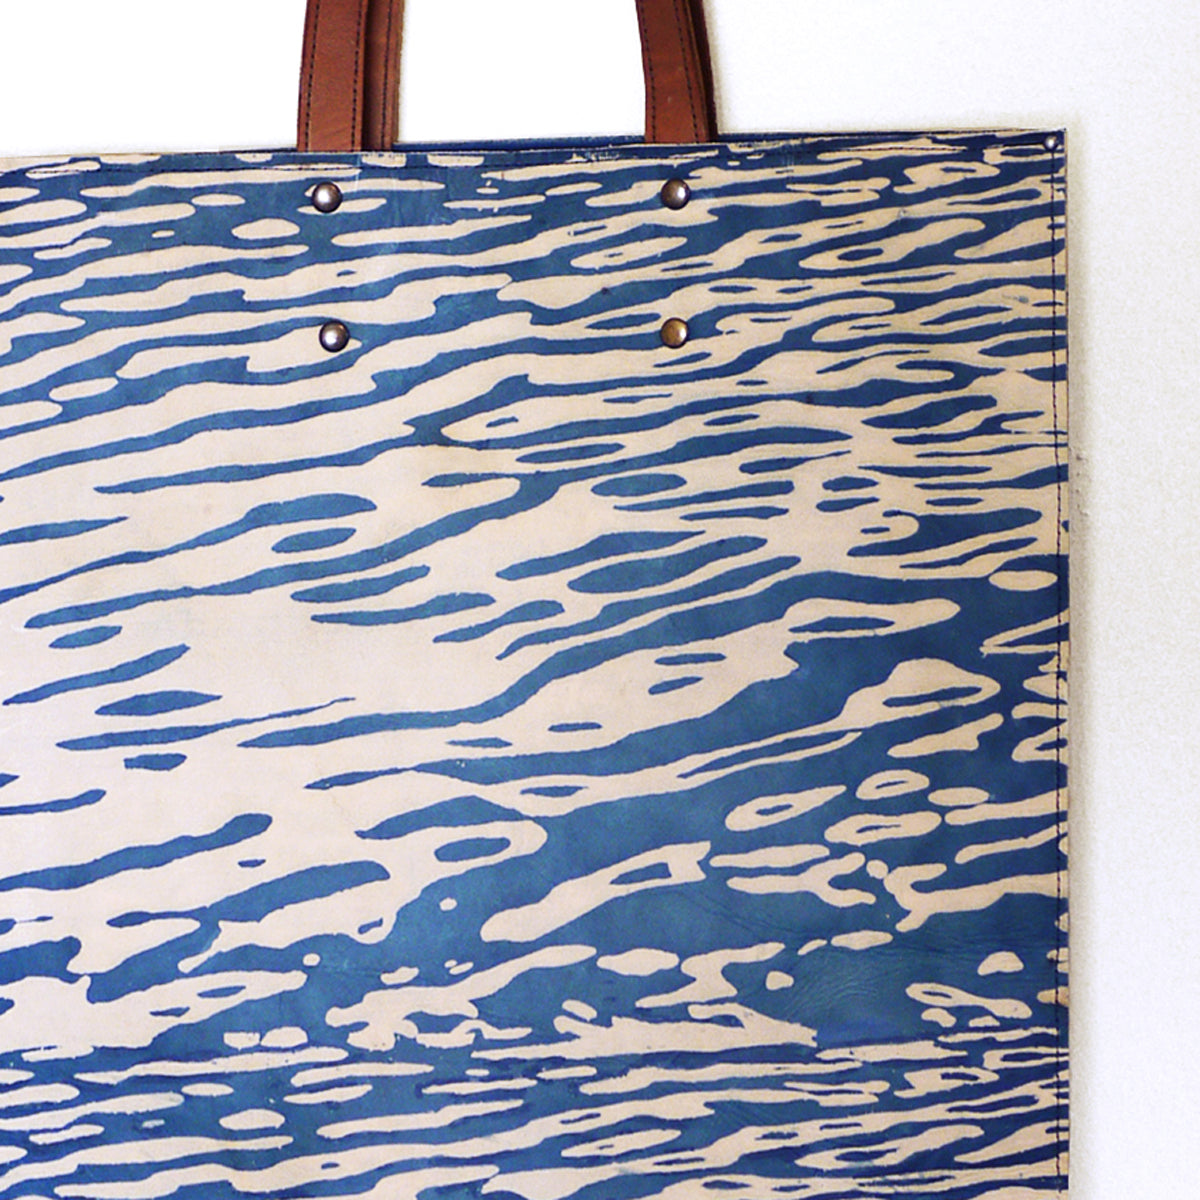 WATER 01 indigo leather tote bag, made to order.